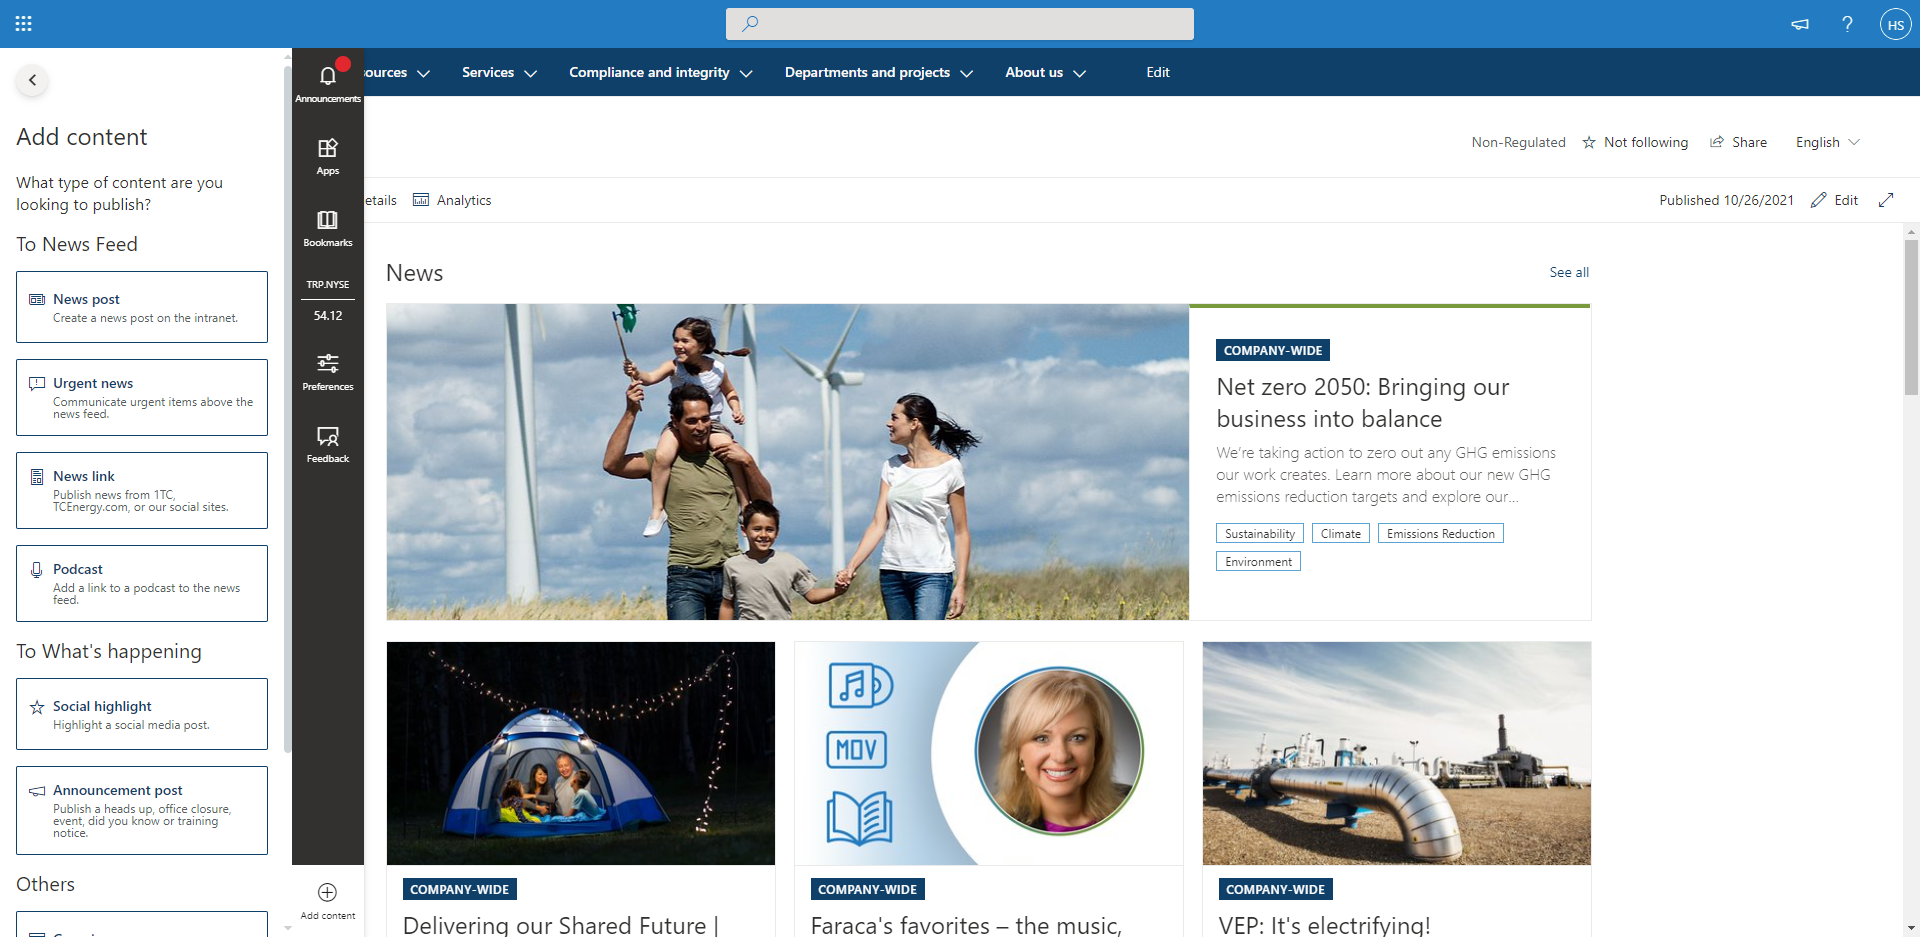 An intranet page from the TC Energy intranet showing the Add Content toolbar to the right.